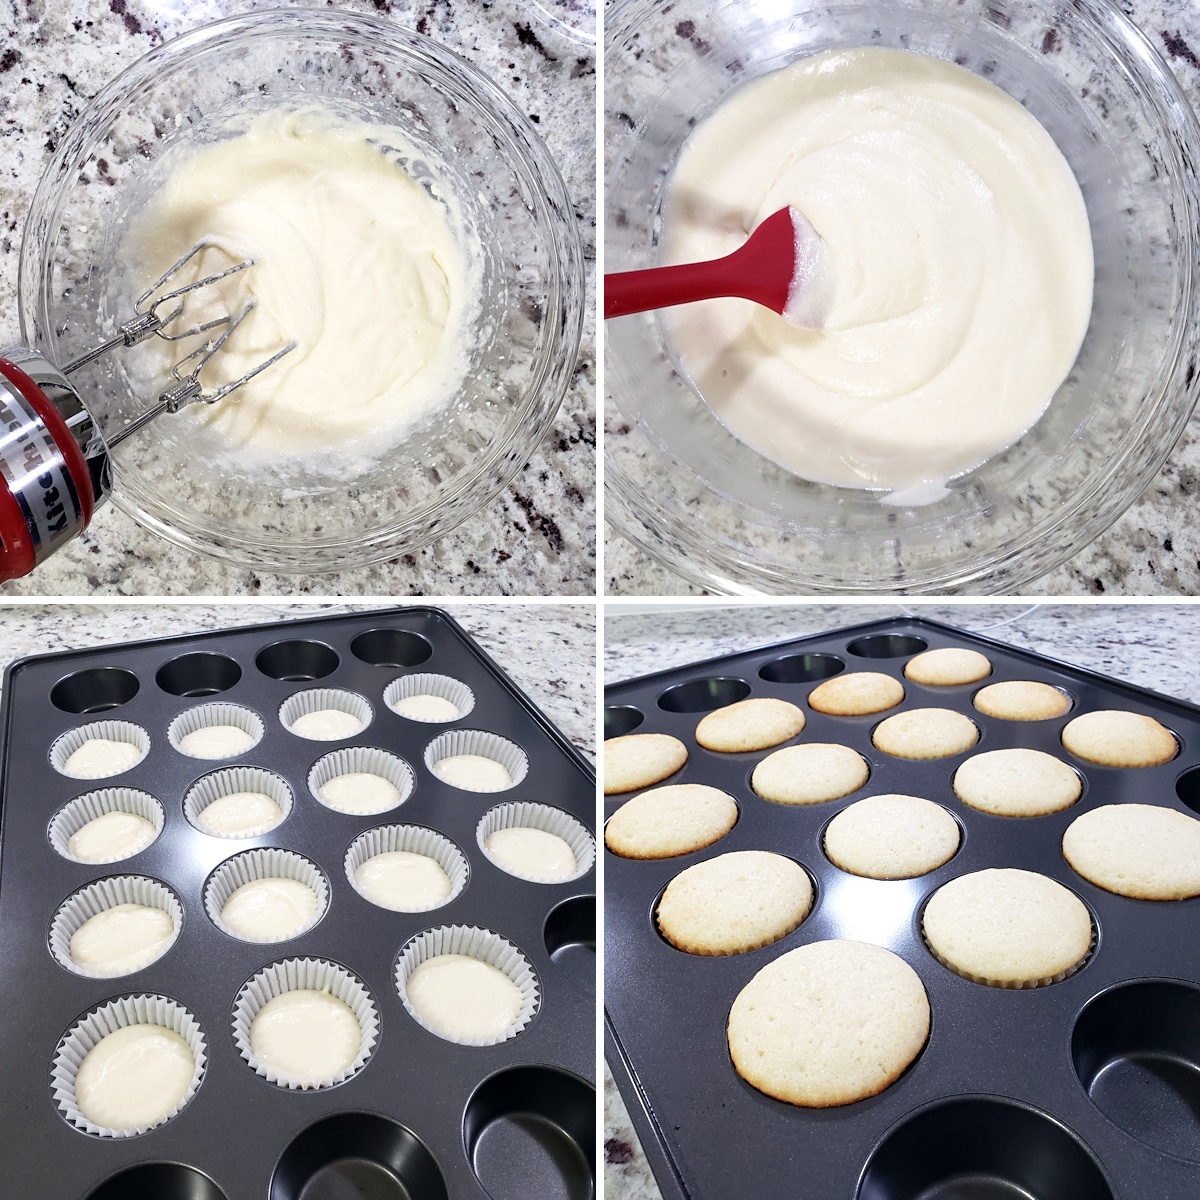 Mixing cupcake batter and pouring into a cupcake pan.